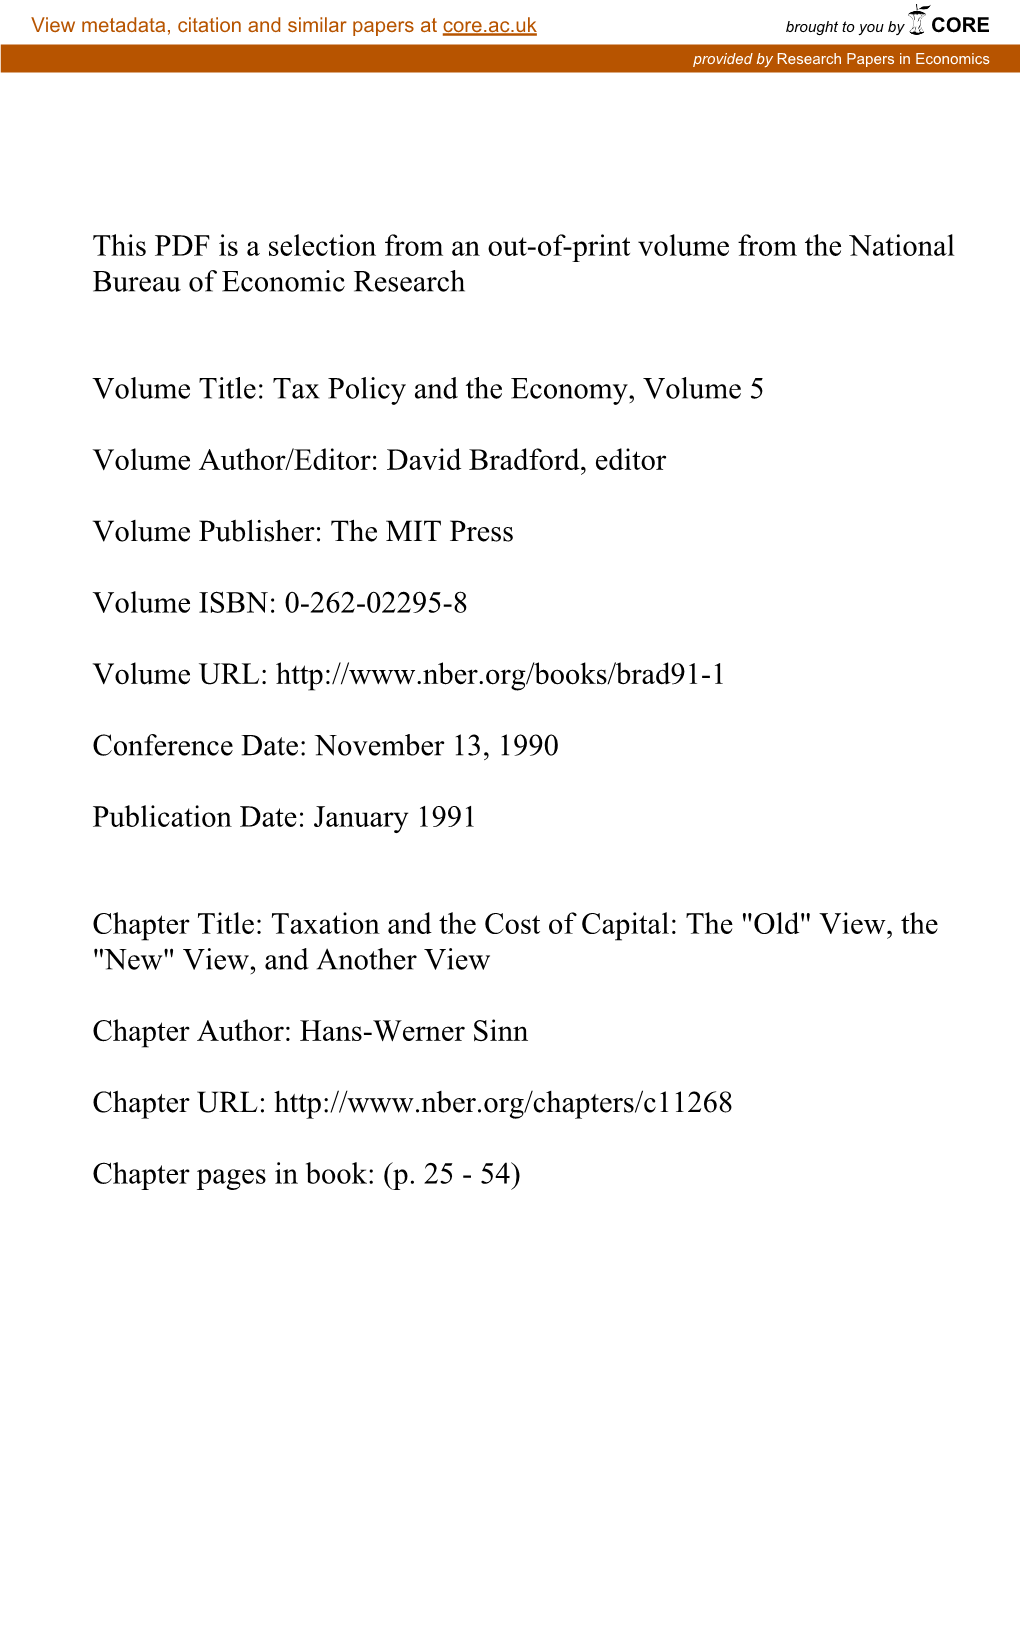 Taxation and the Cost of Capital: the "Old" View, the "New" View, and Another View